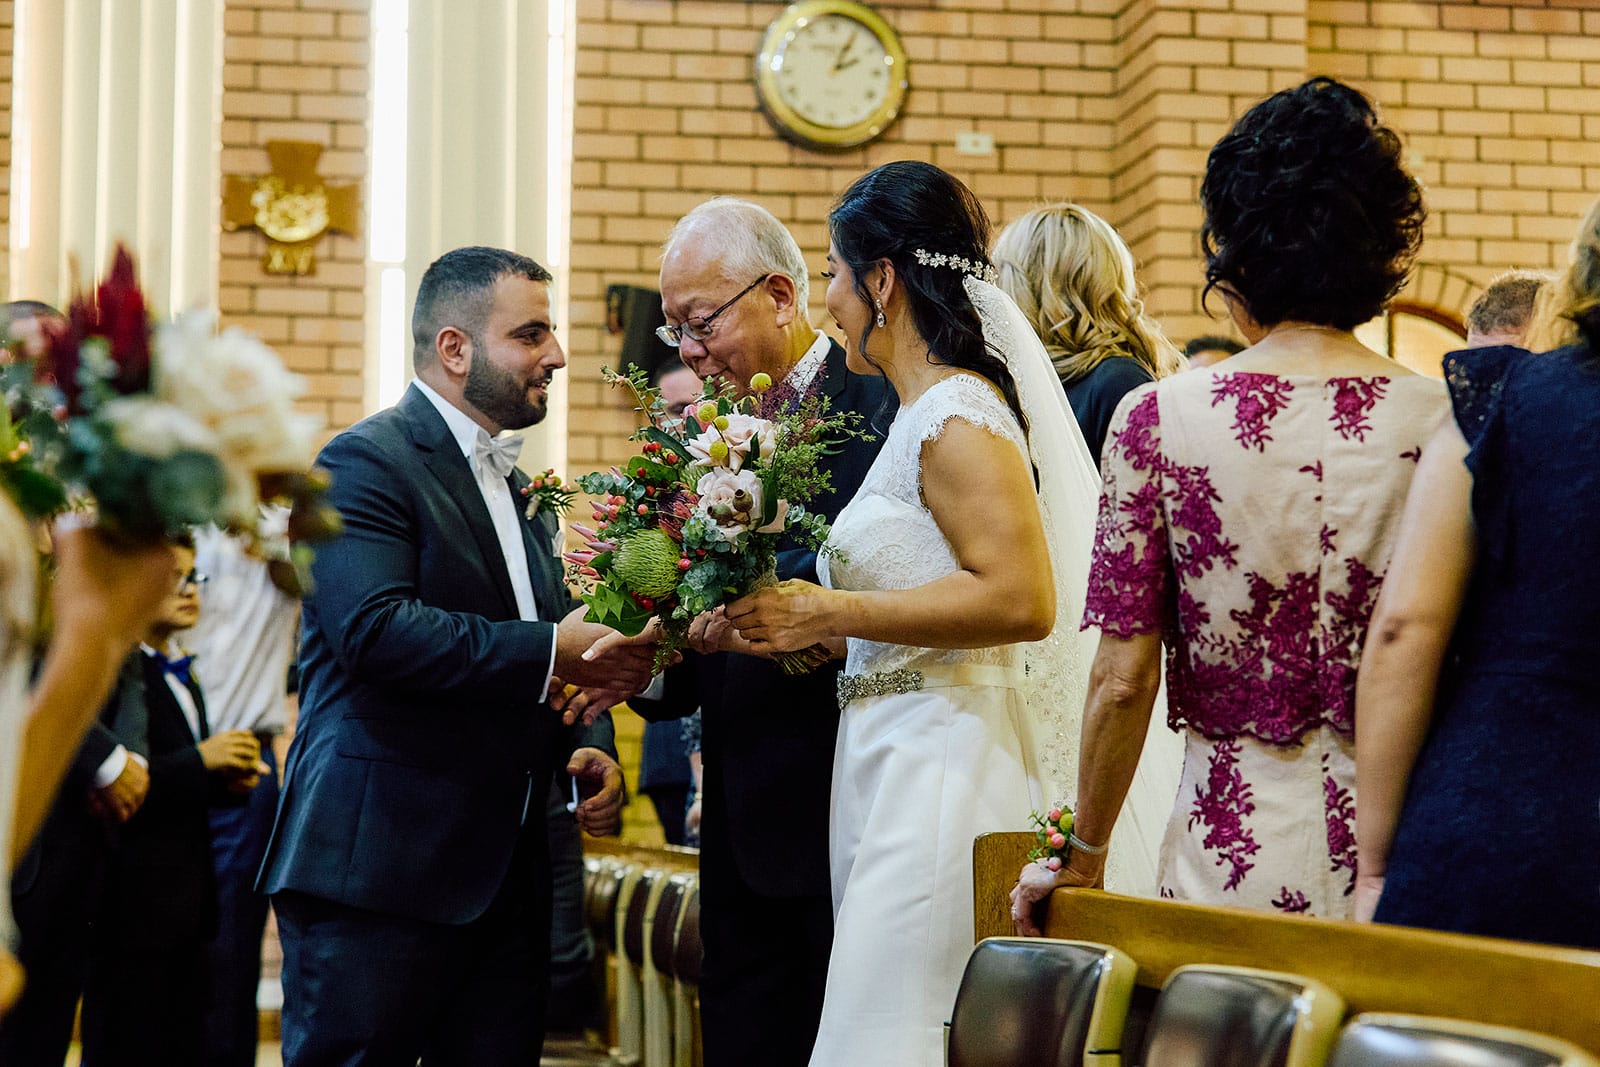 shaking hands with the Father of the Bride